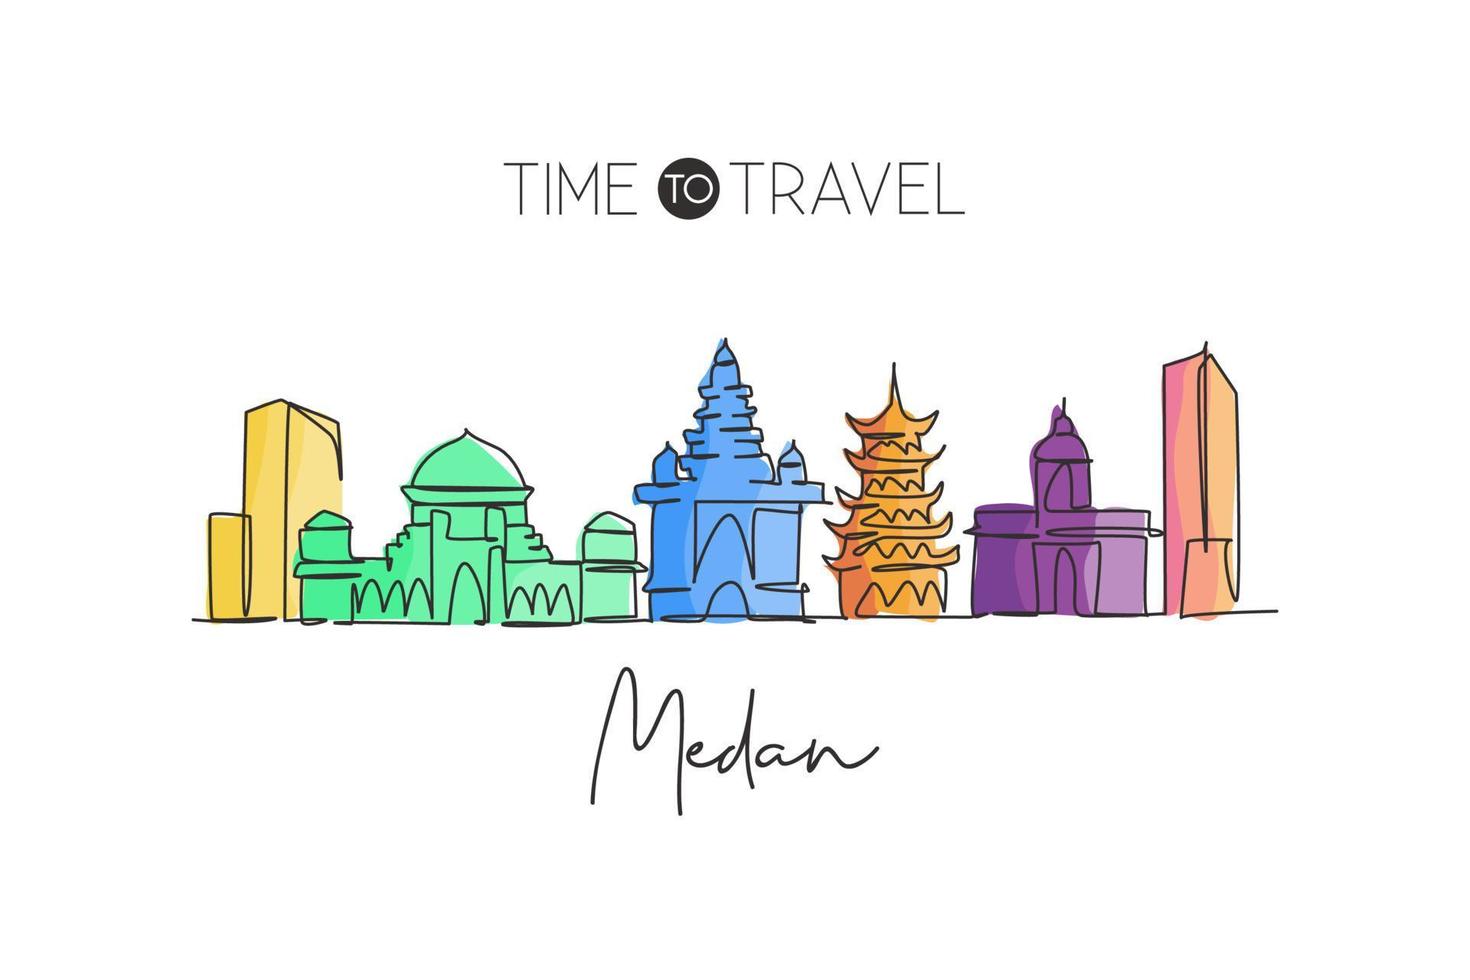 One continuous line drawing Medan city skyline Indonesia. Beautiful city landmark home decor wall art poster print. World landscape tourism travel vacation. Single line draw design vector illustration